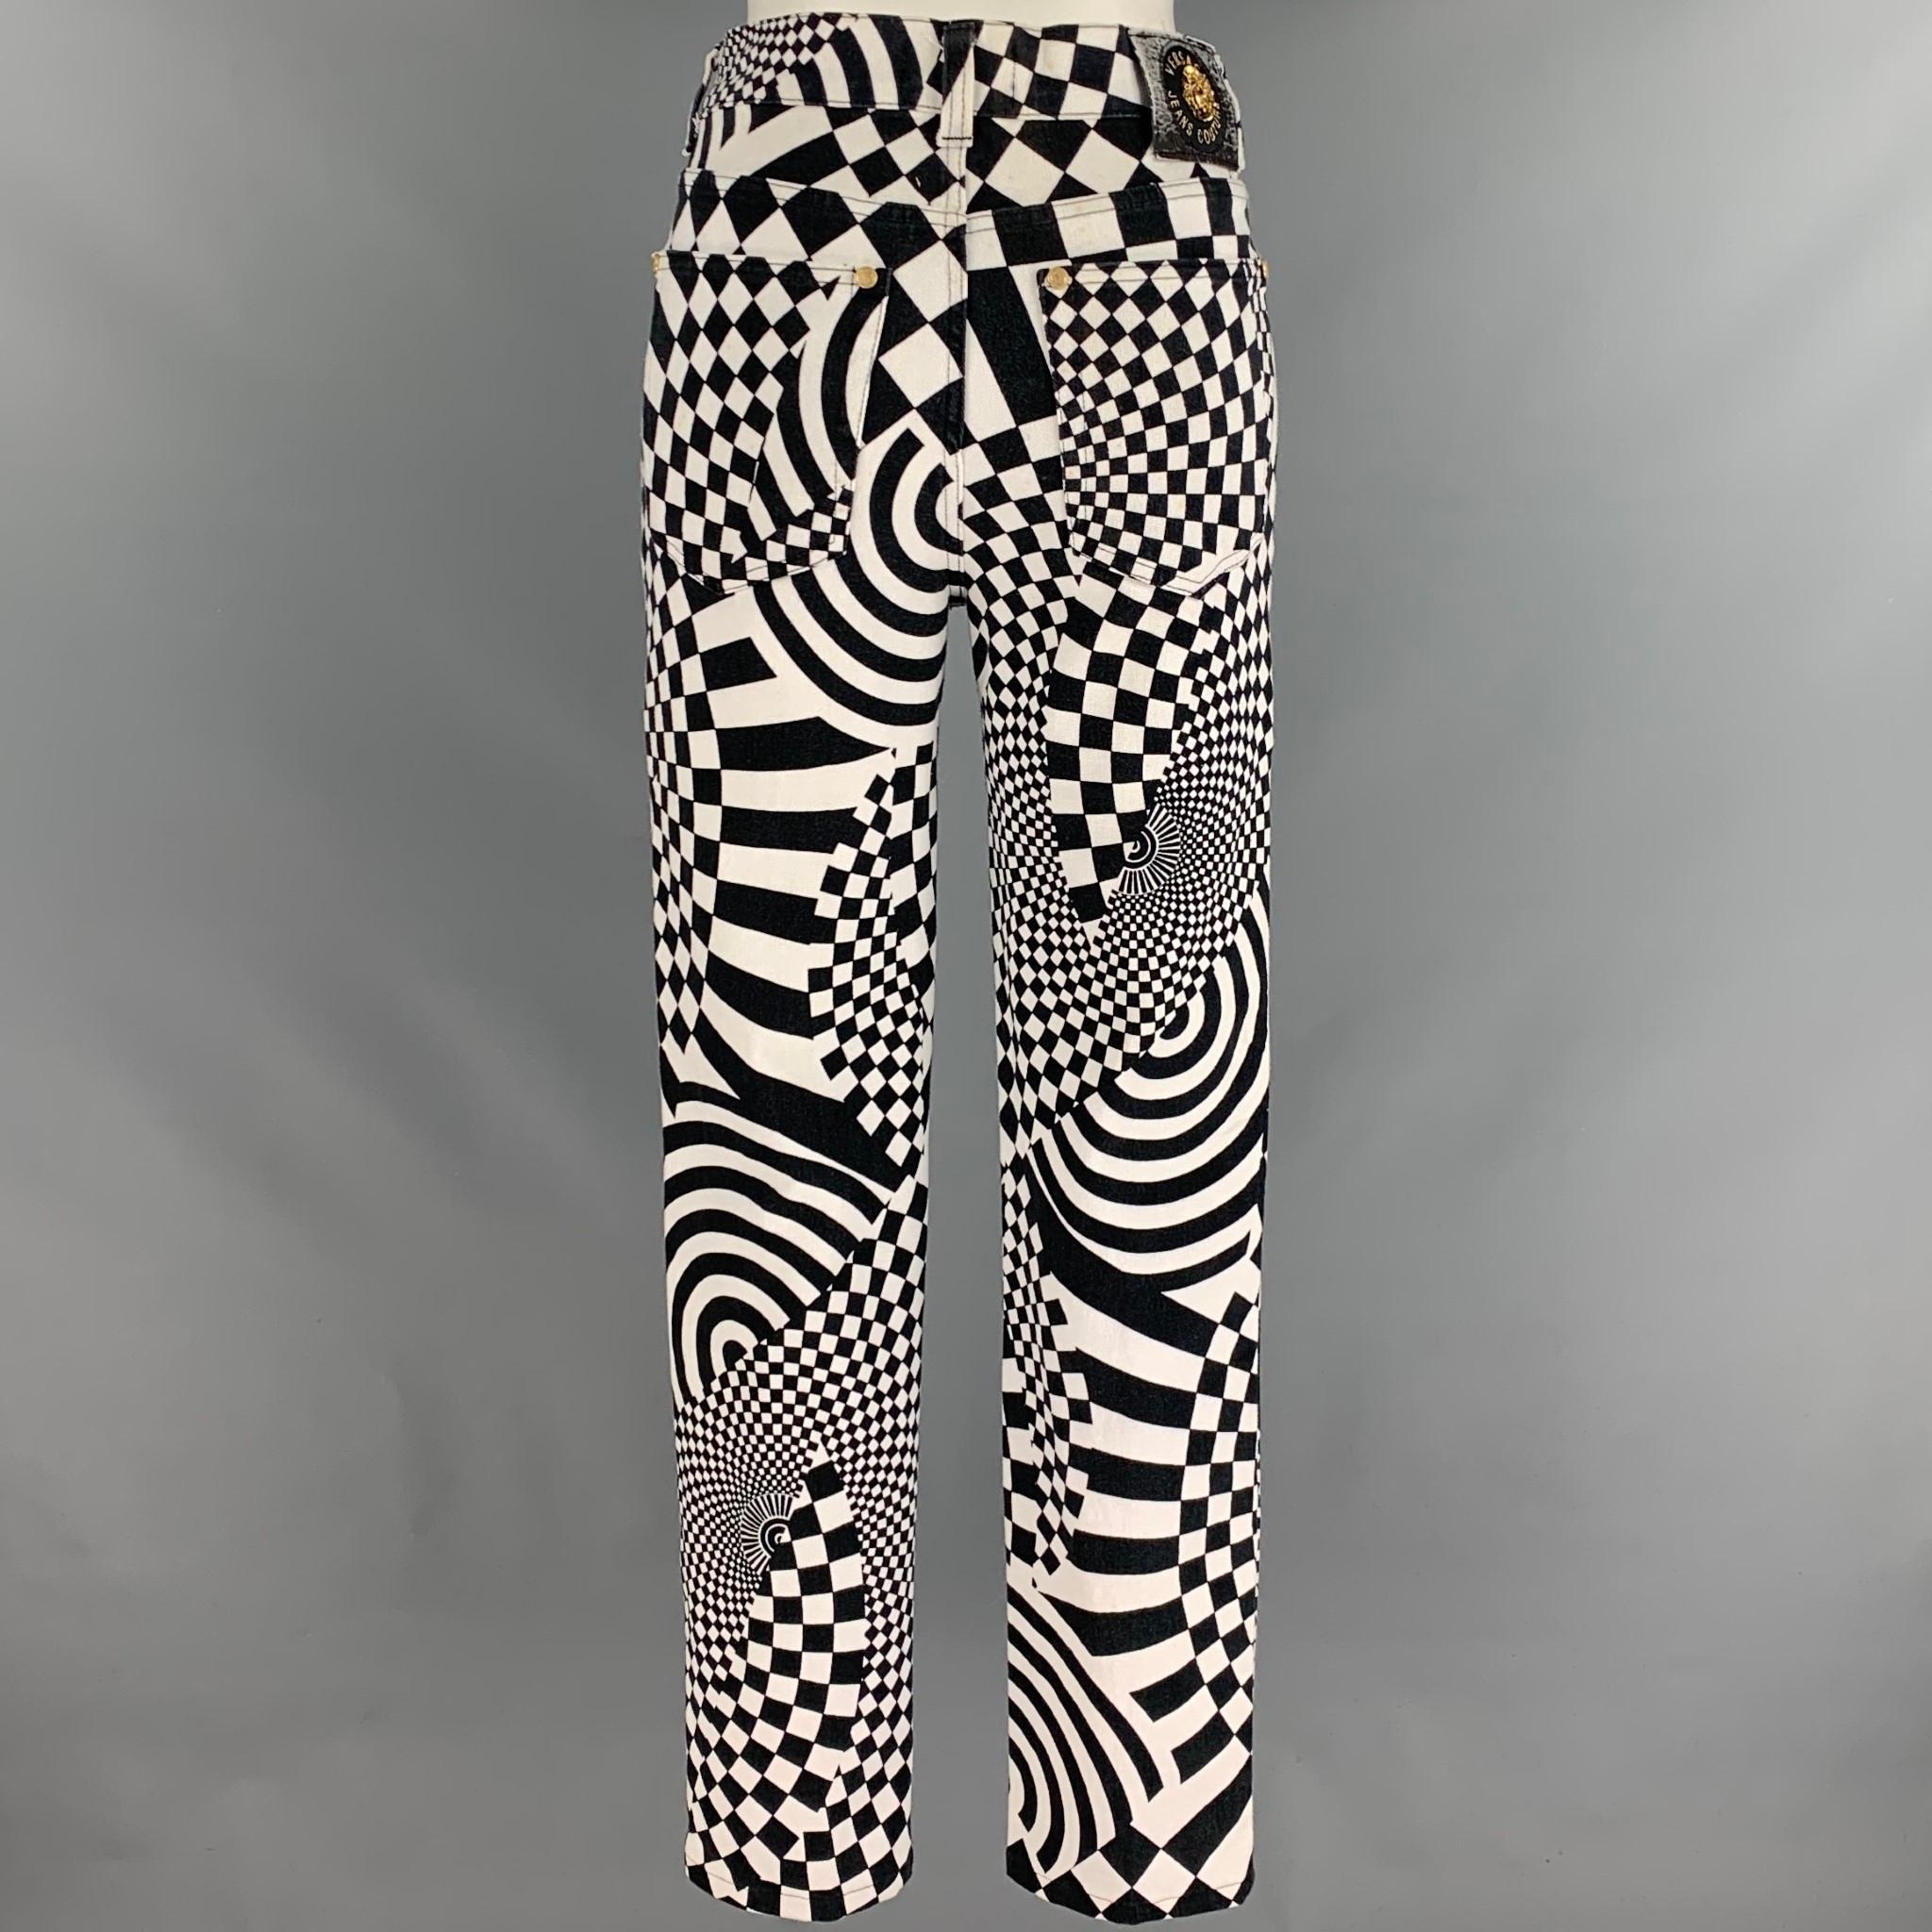 Vintage VERSACE JEANS COUTURE jeans comes in a black & white geometric cotton featuring a skinny fit, gold tone hardware, and a zip fly closure. Made in Italy.

Very Good Pre-Owned Condition.
Marked: 36/50

Measurements:

Waist: 30 in.
Rise: 11